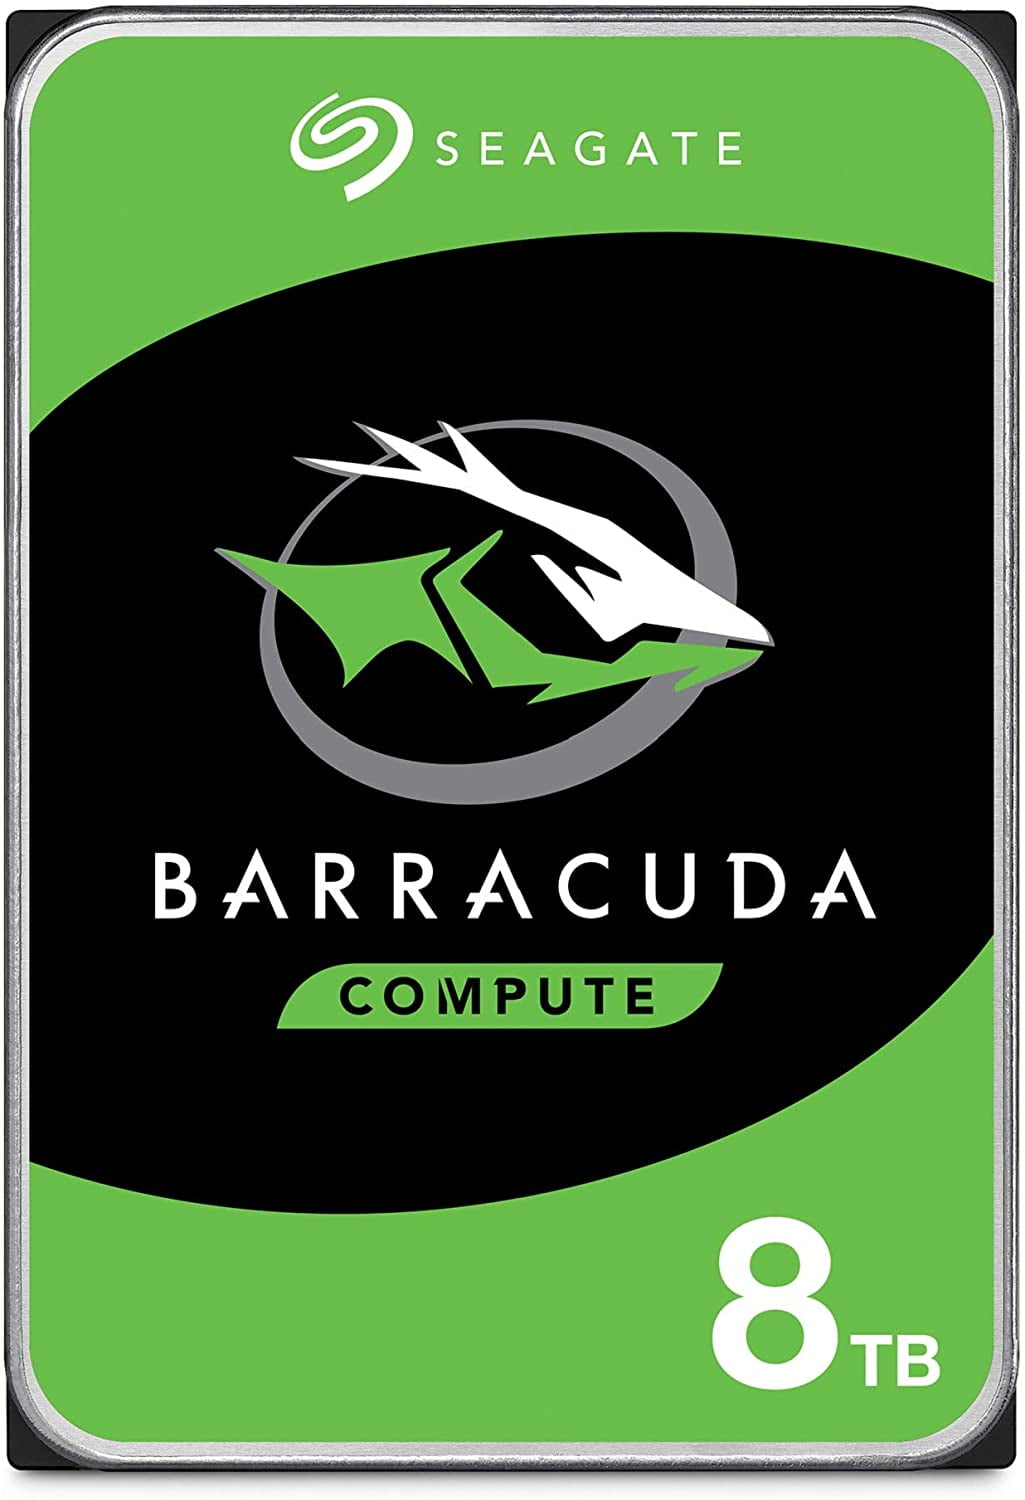 Seagate BarraCuda 8TB Internal Hard Drive HDD – 3.5 Inch Sata 6 Gb/s 5400  RPM 256MB Cache for Computer Desktop PC – Frustration Free Packaging 